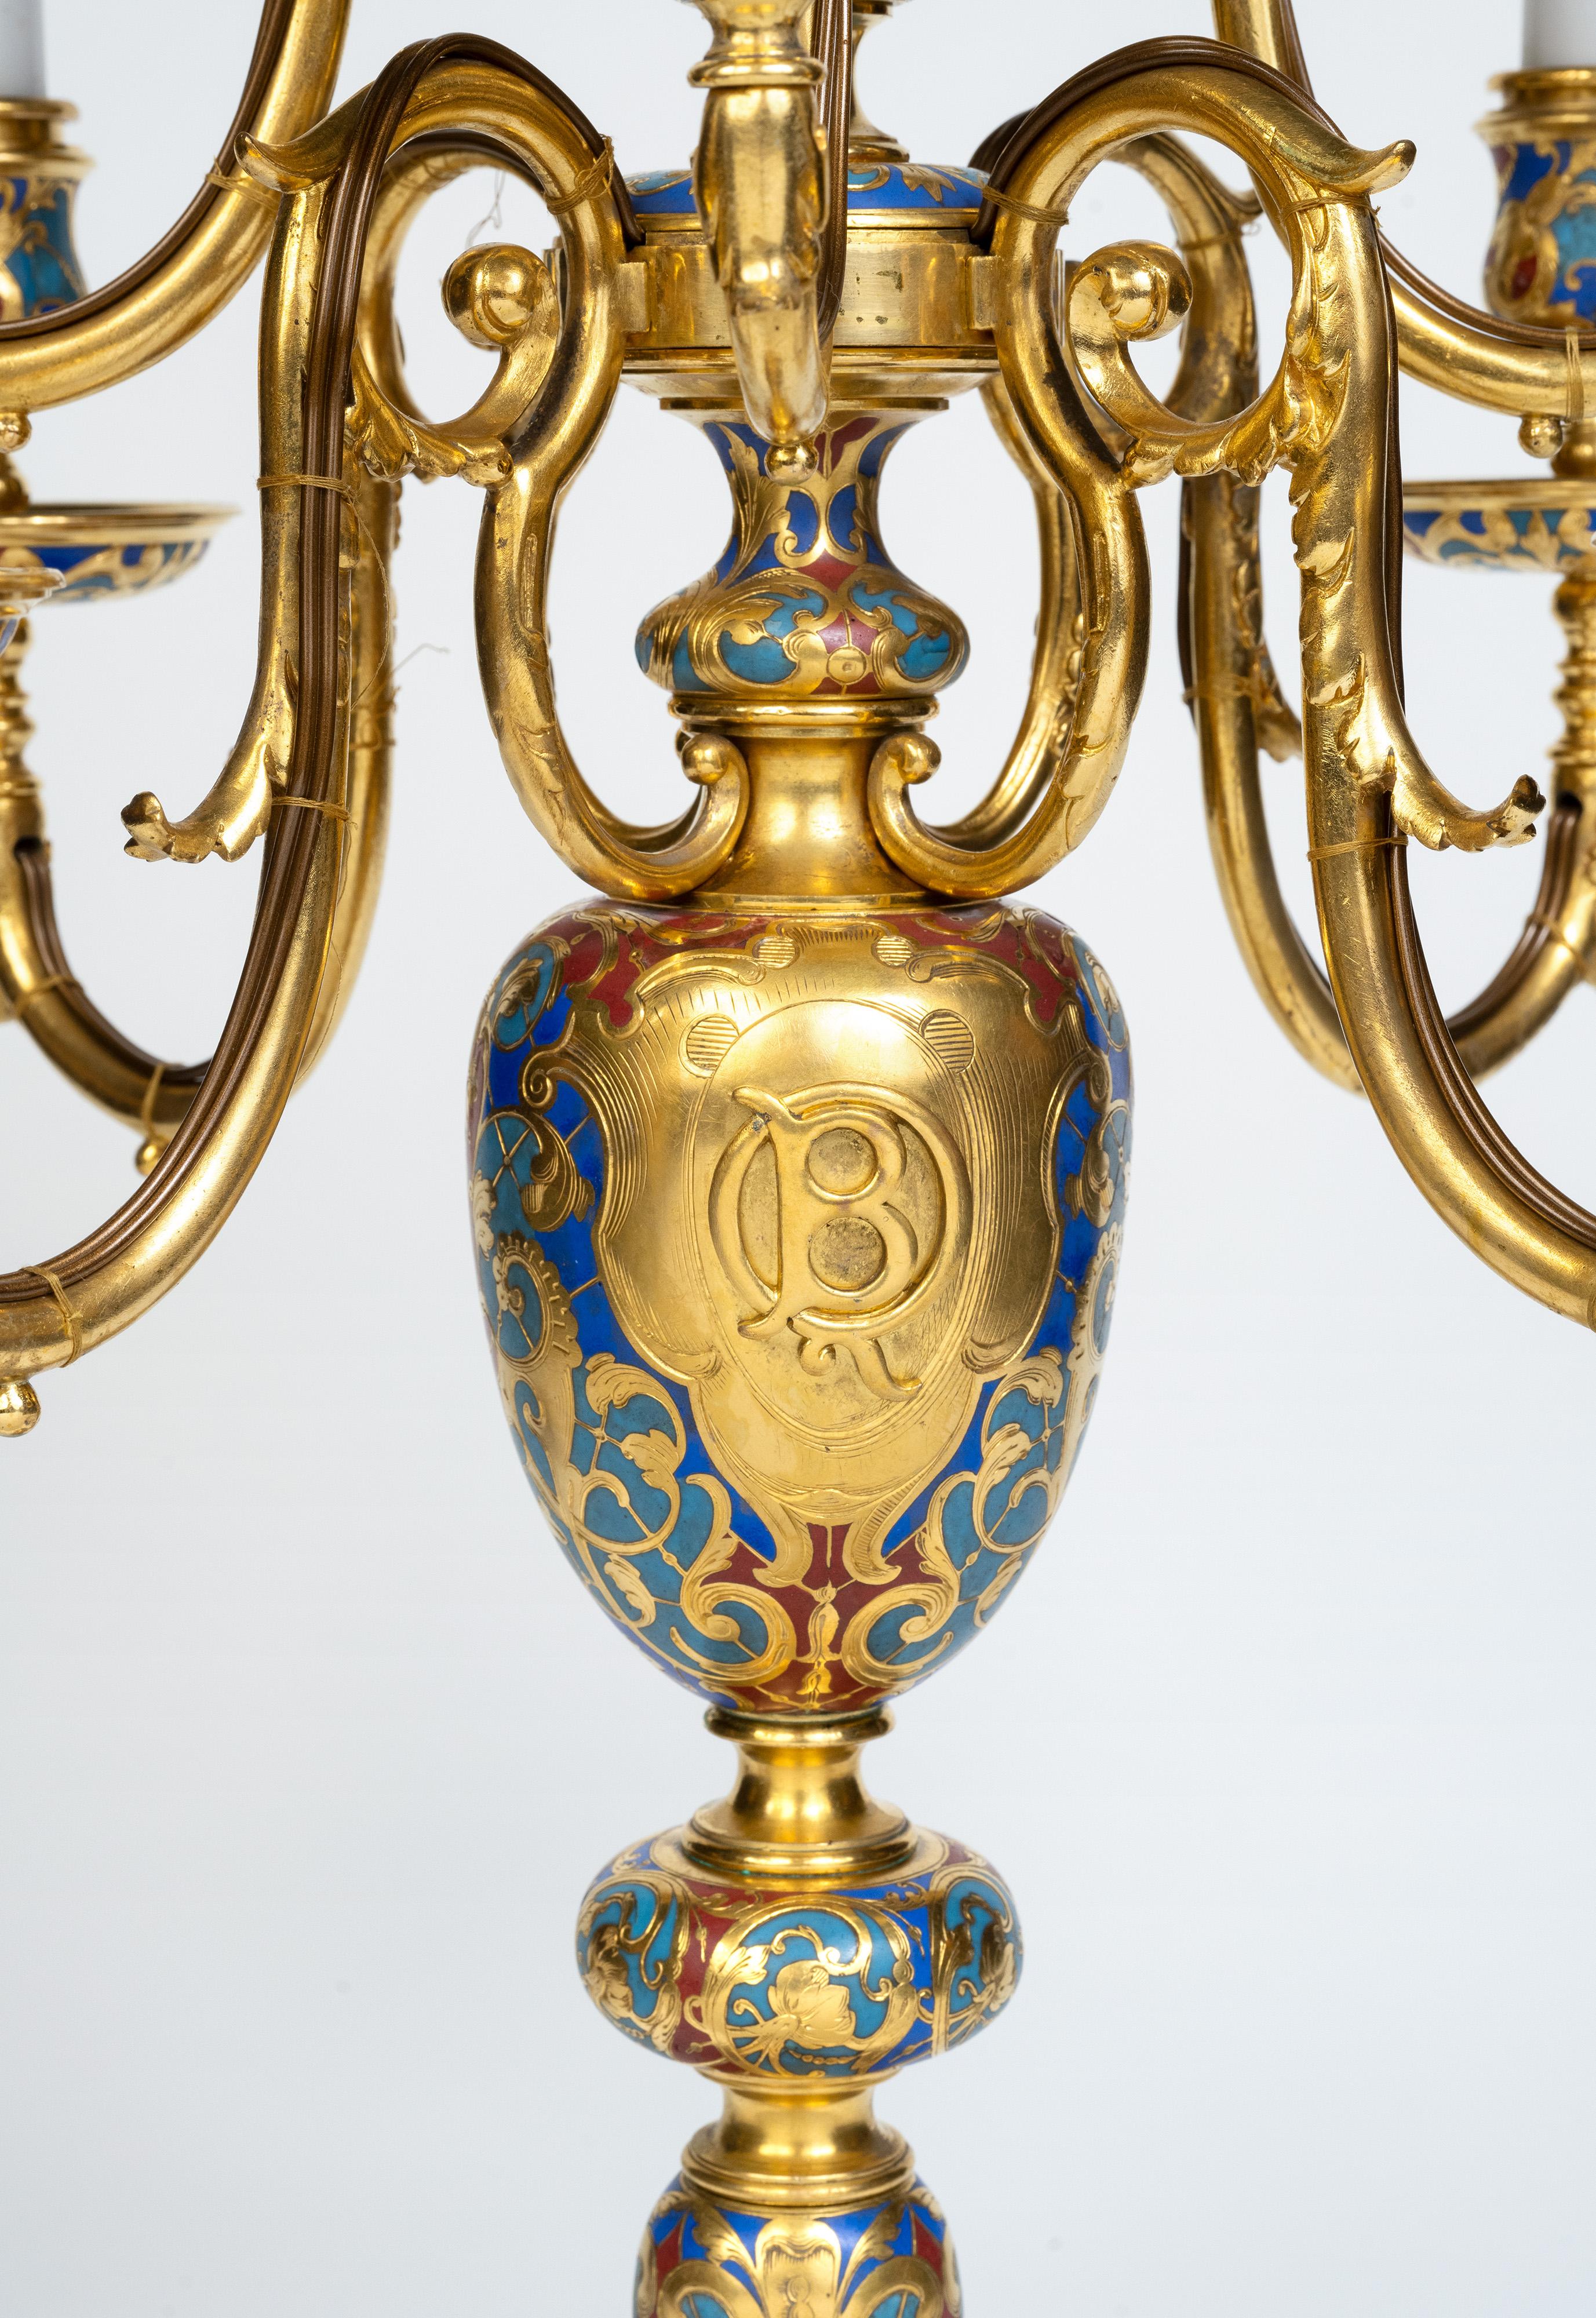 An Exceptional Pair of Champleve Enamel Ormolu Candelabra by Sevin & Barbedienne In Good Condition For Sale In New York, NY